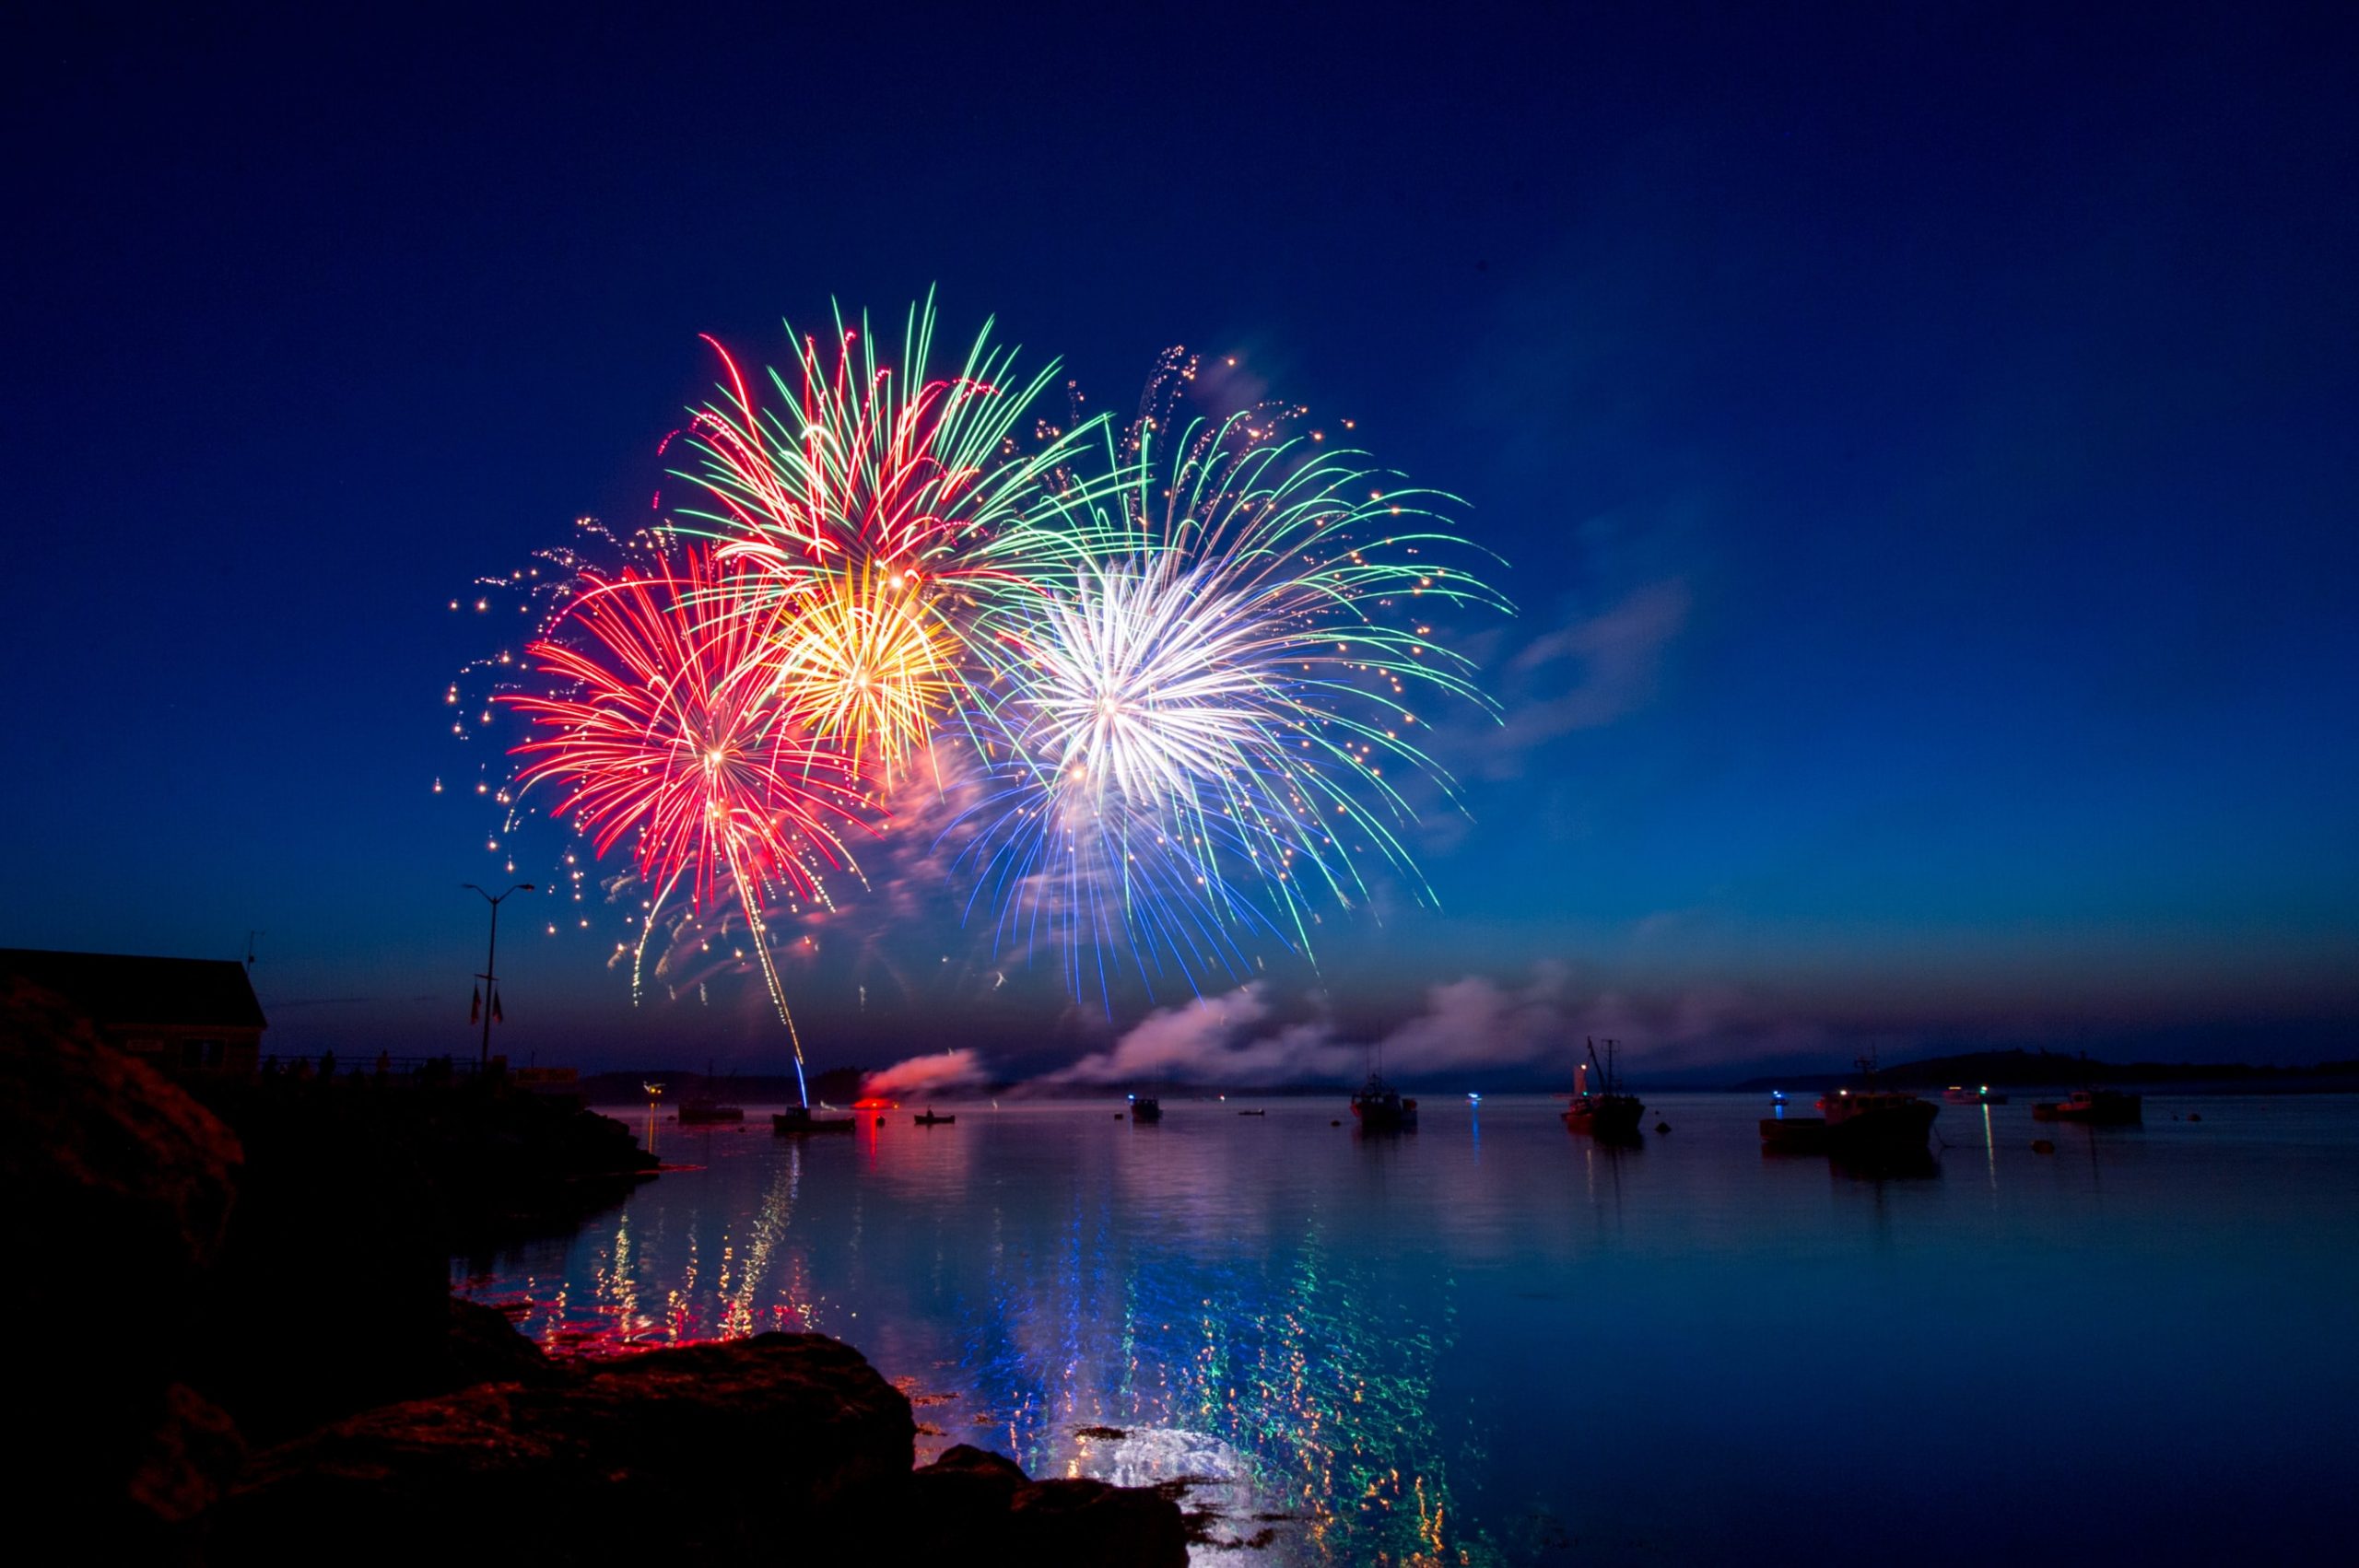 Colorful display of fireworks